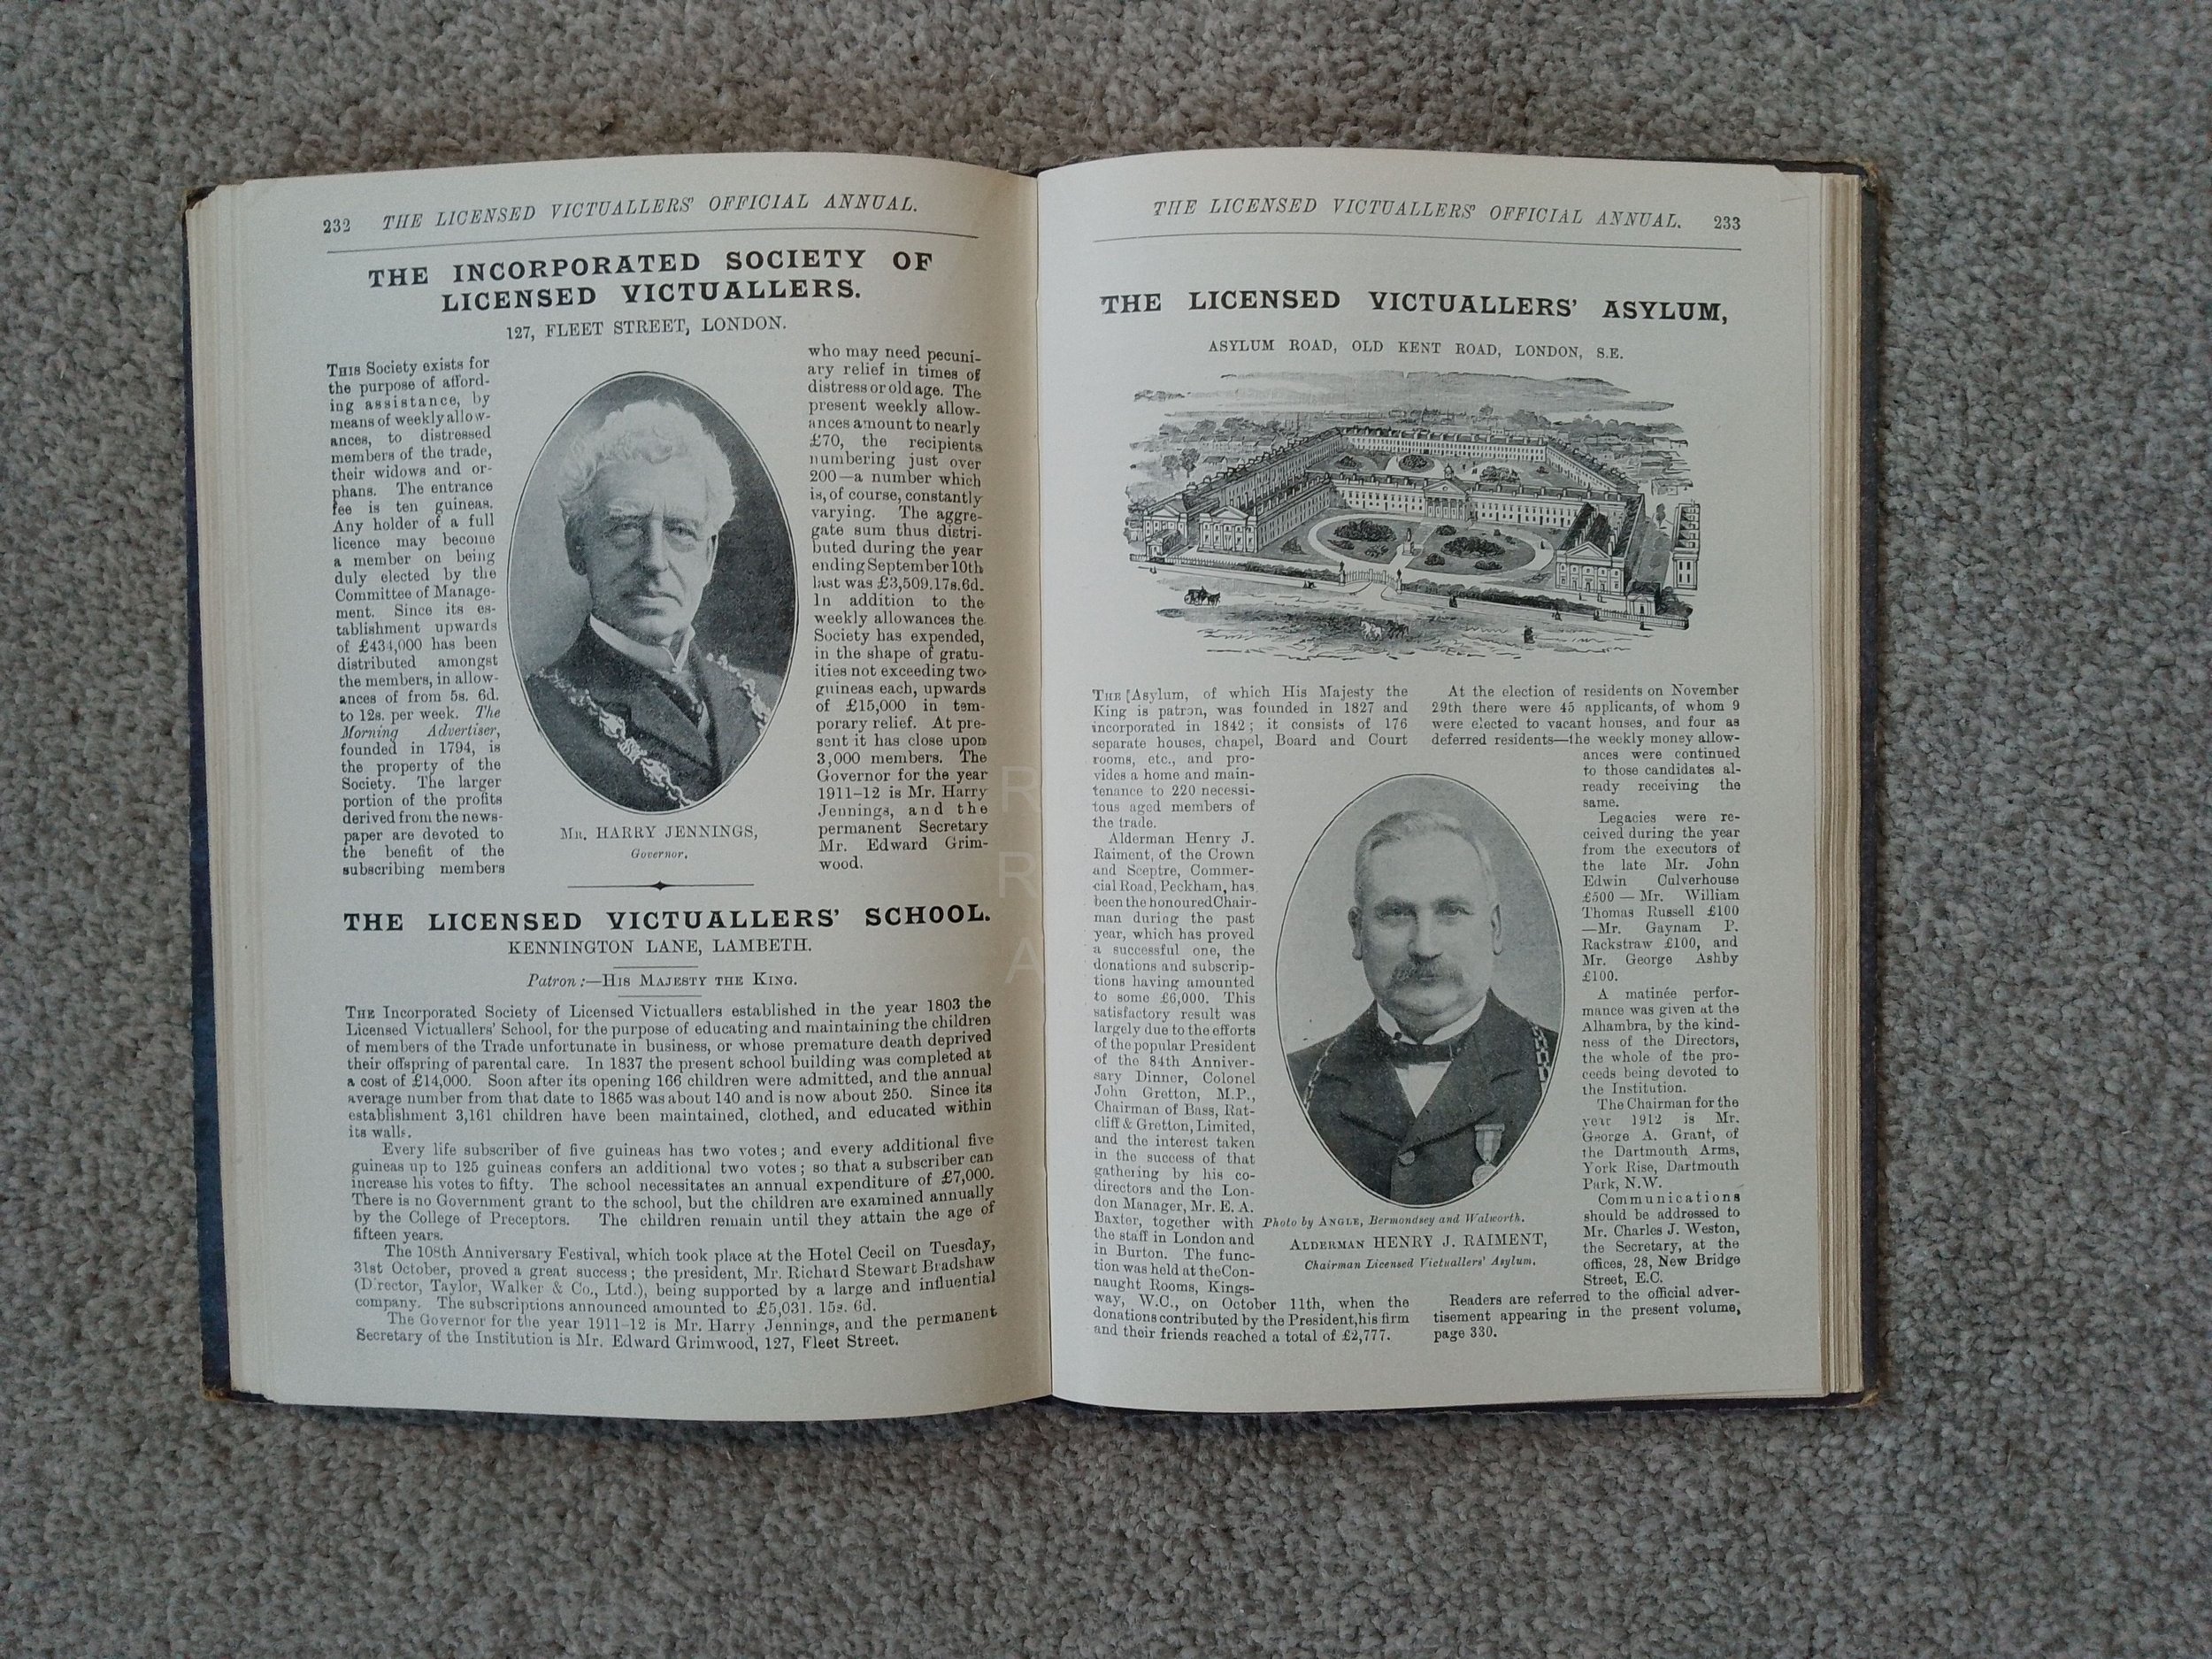 Licensed Victuallers Annual 1912 - 4w.jpg